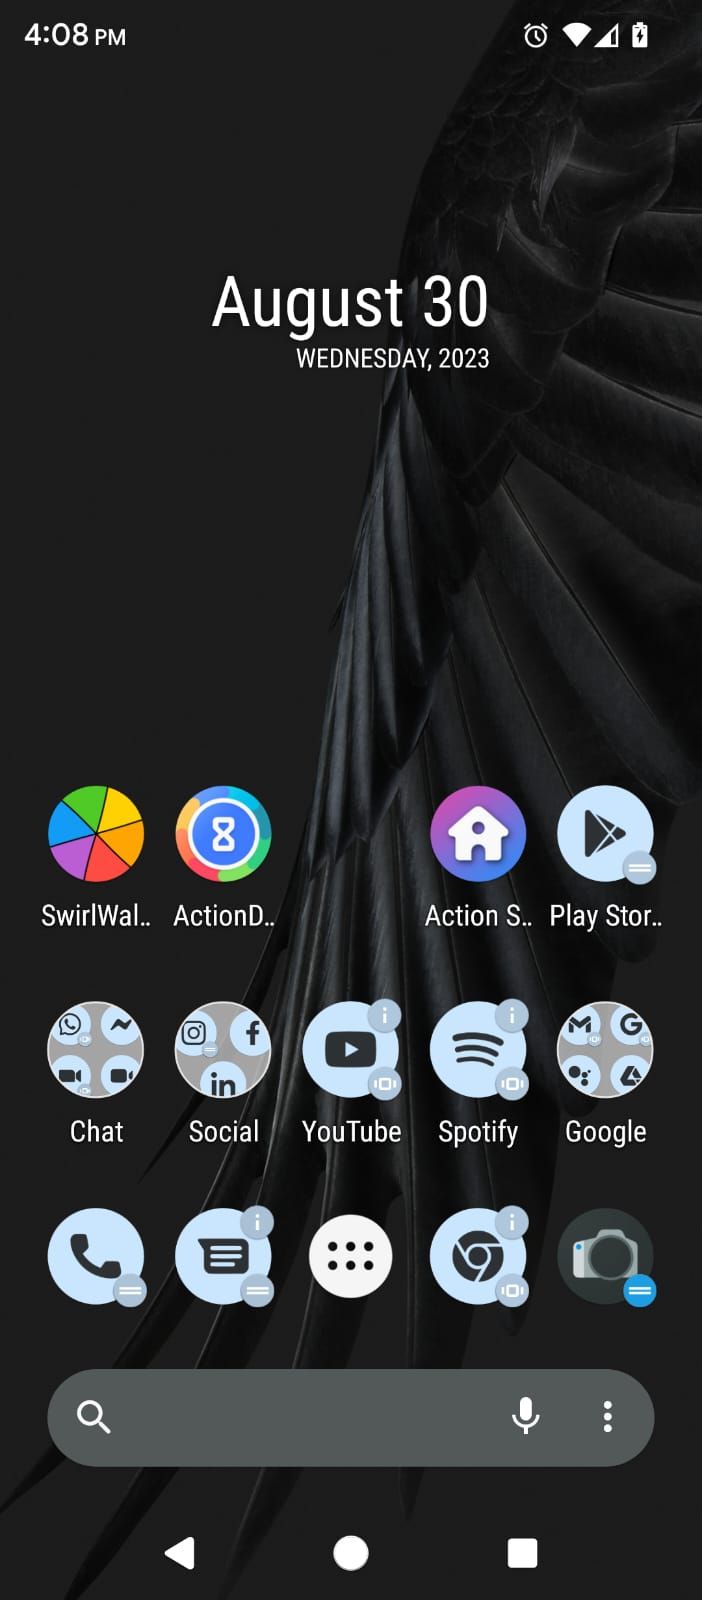 New icon pack applied in Action Launcher